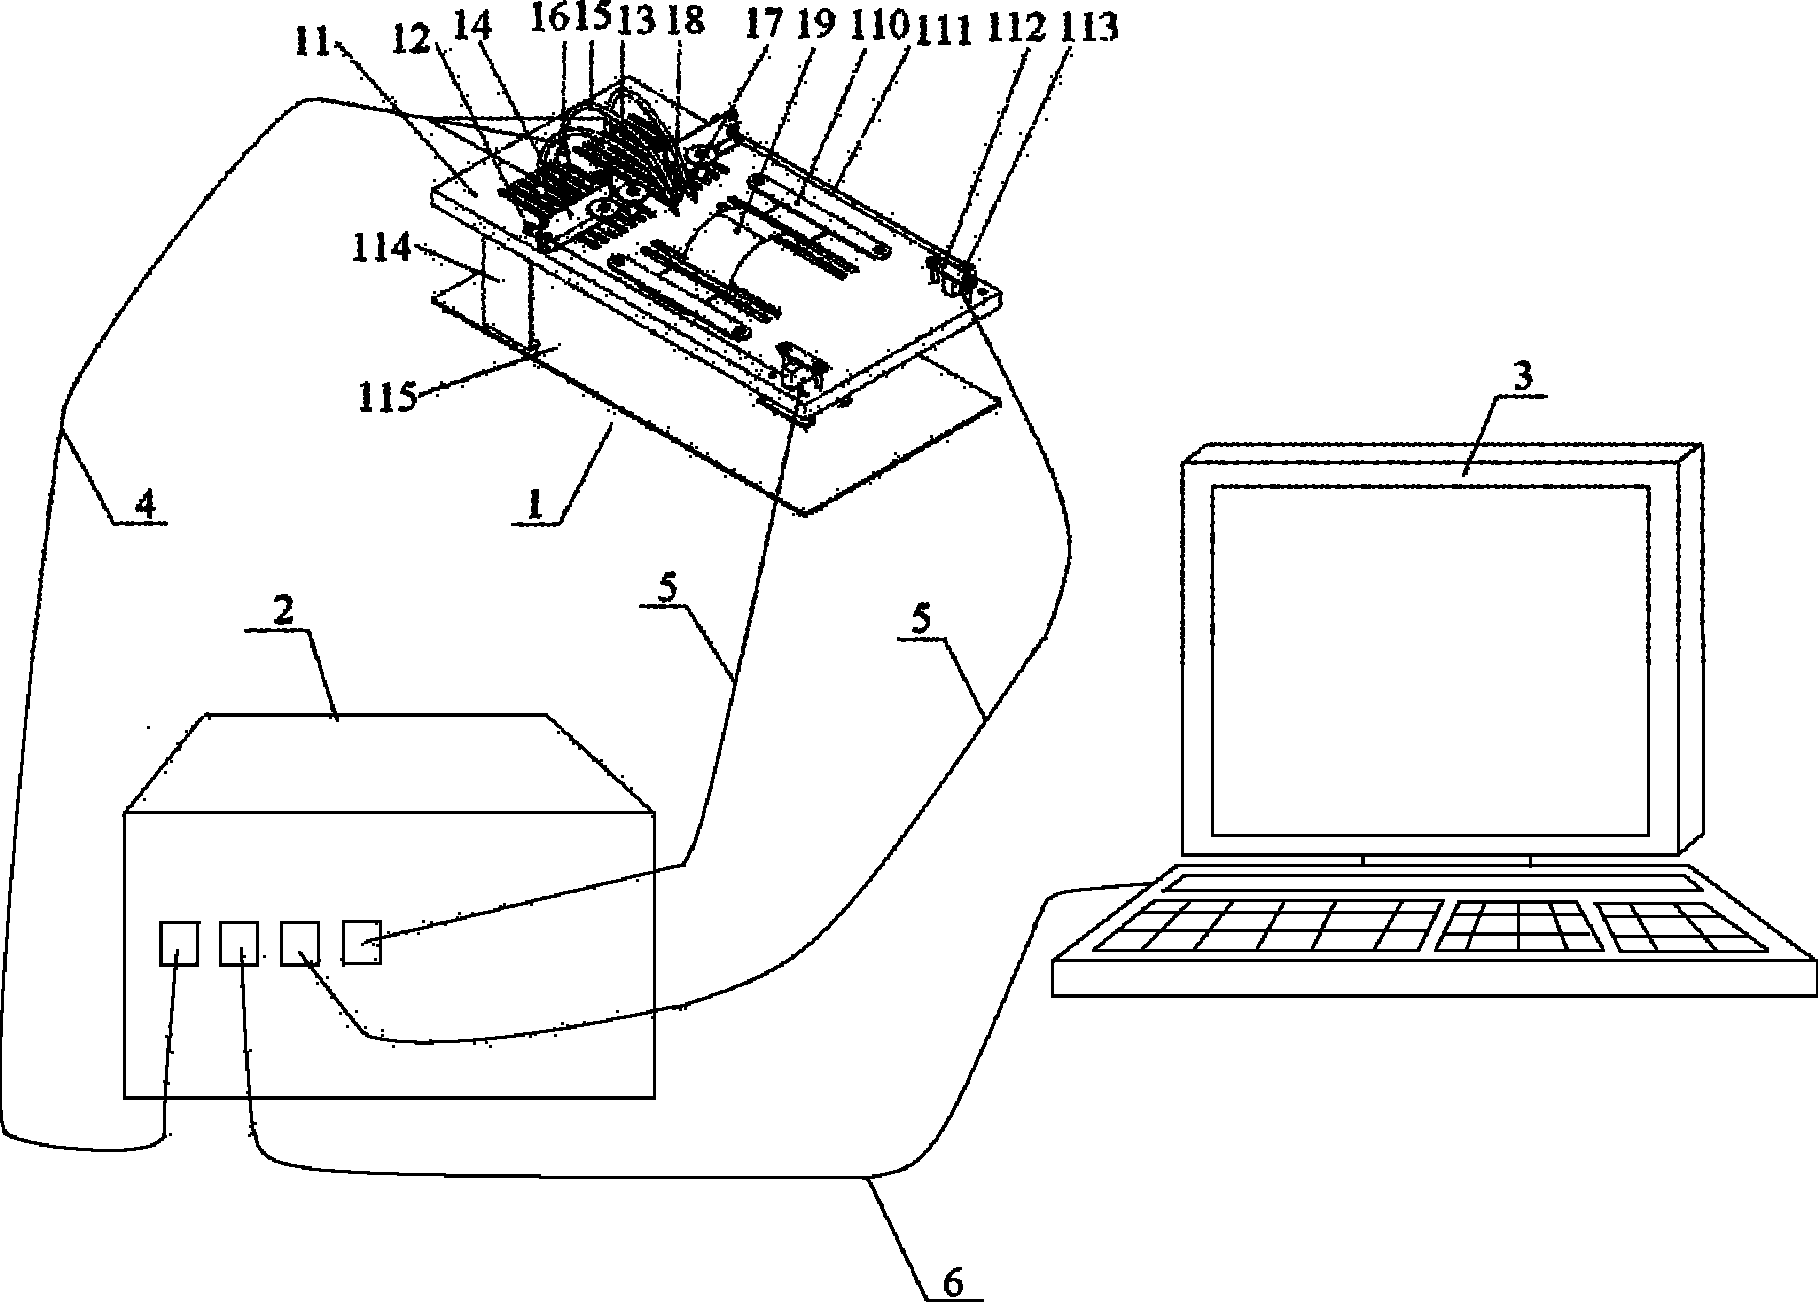 System for determining functions of lower limb nerves and muscles of rat